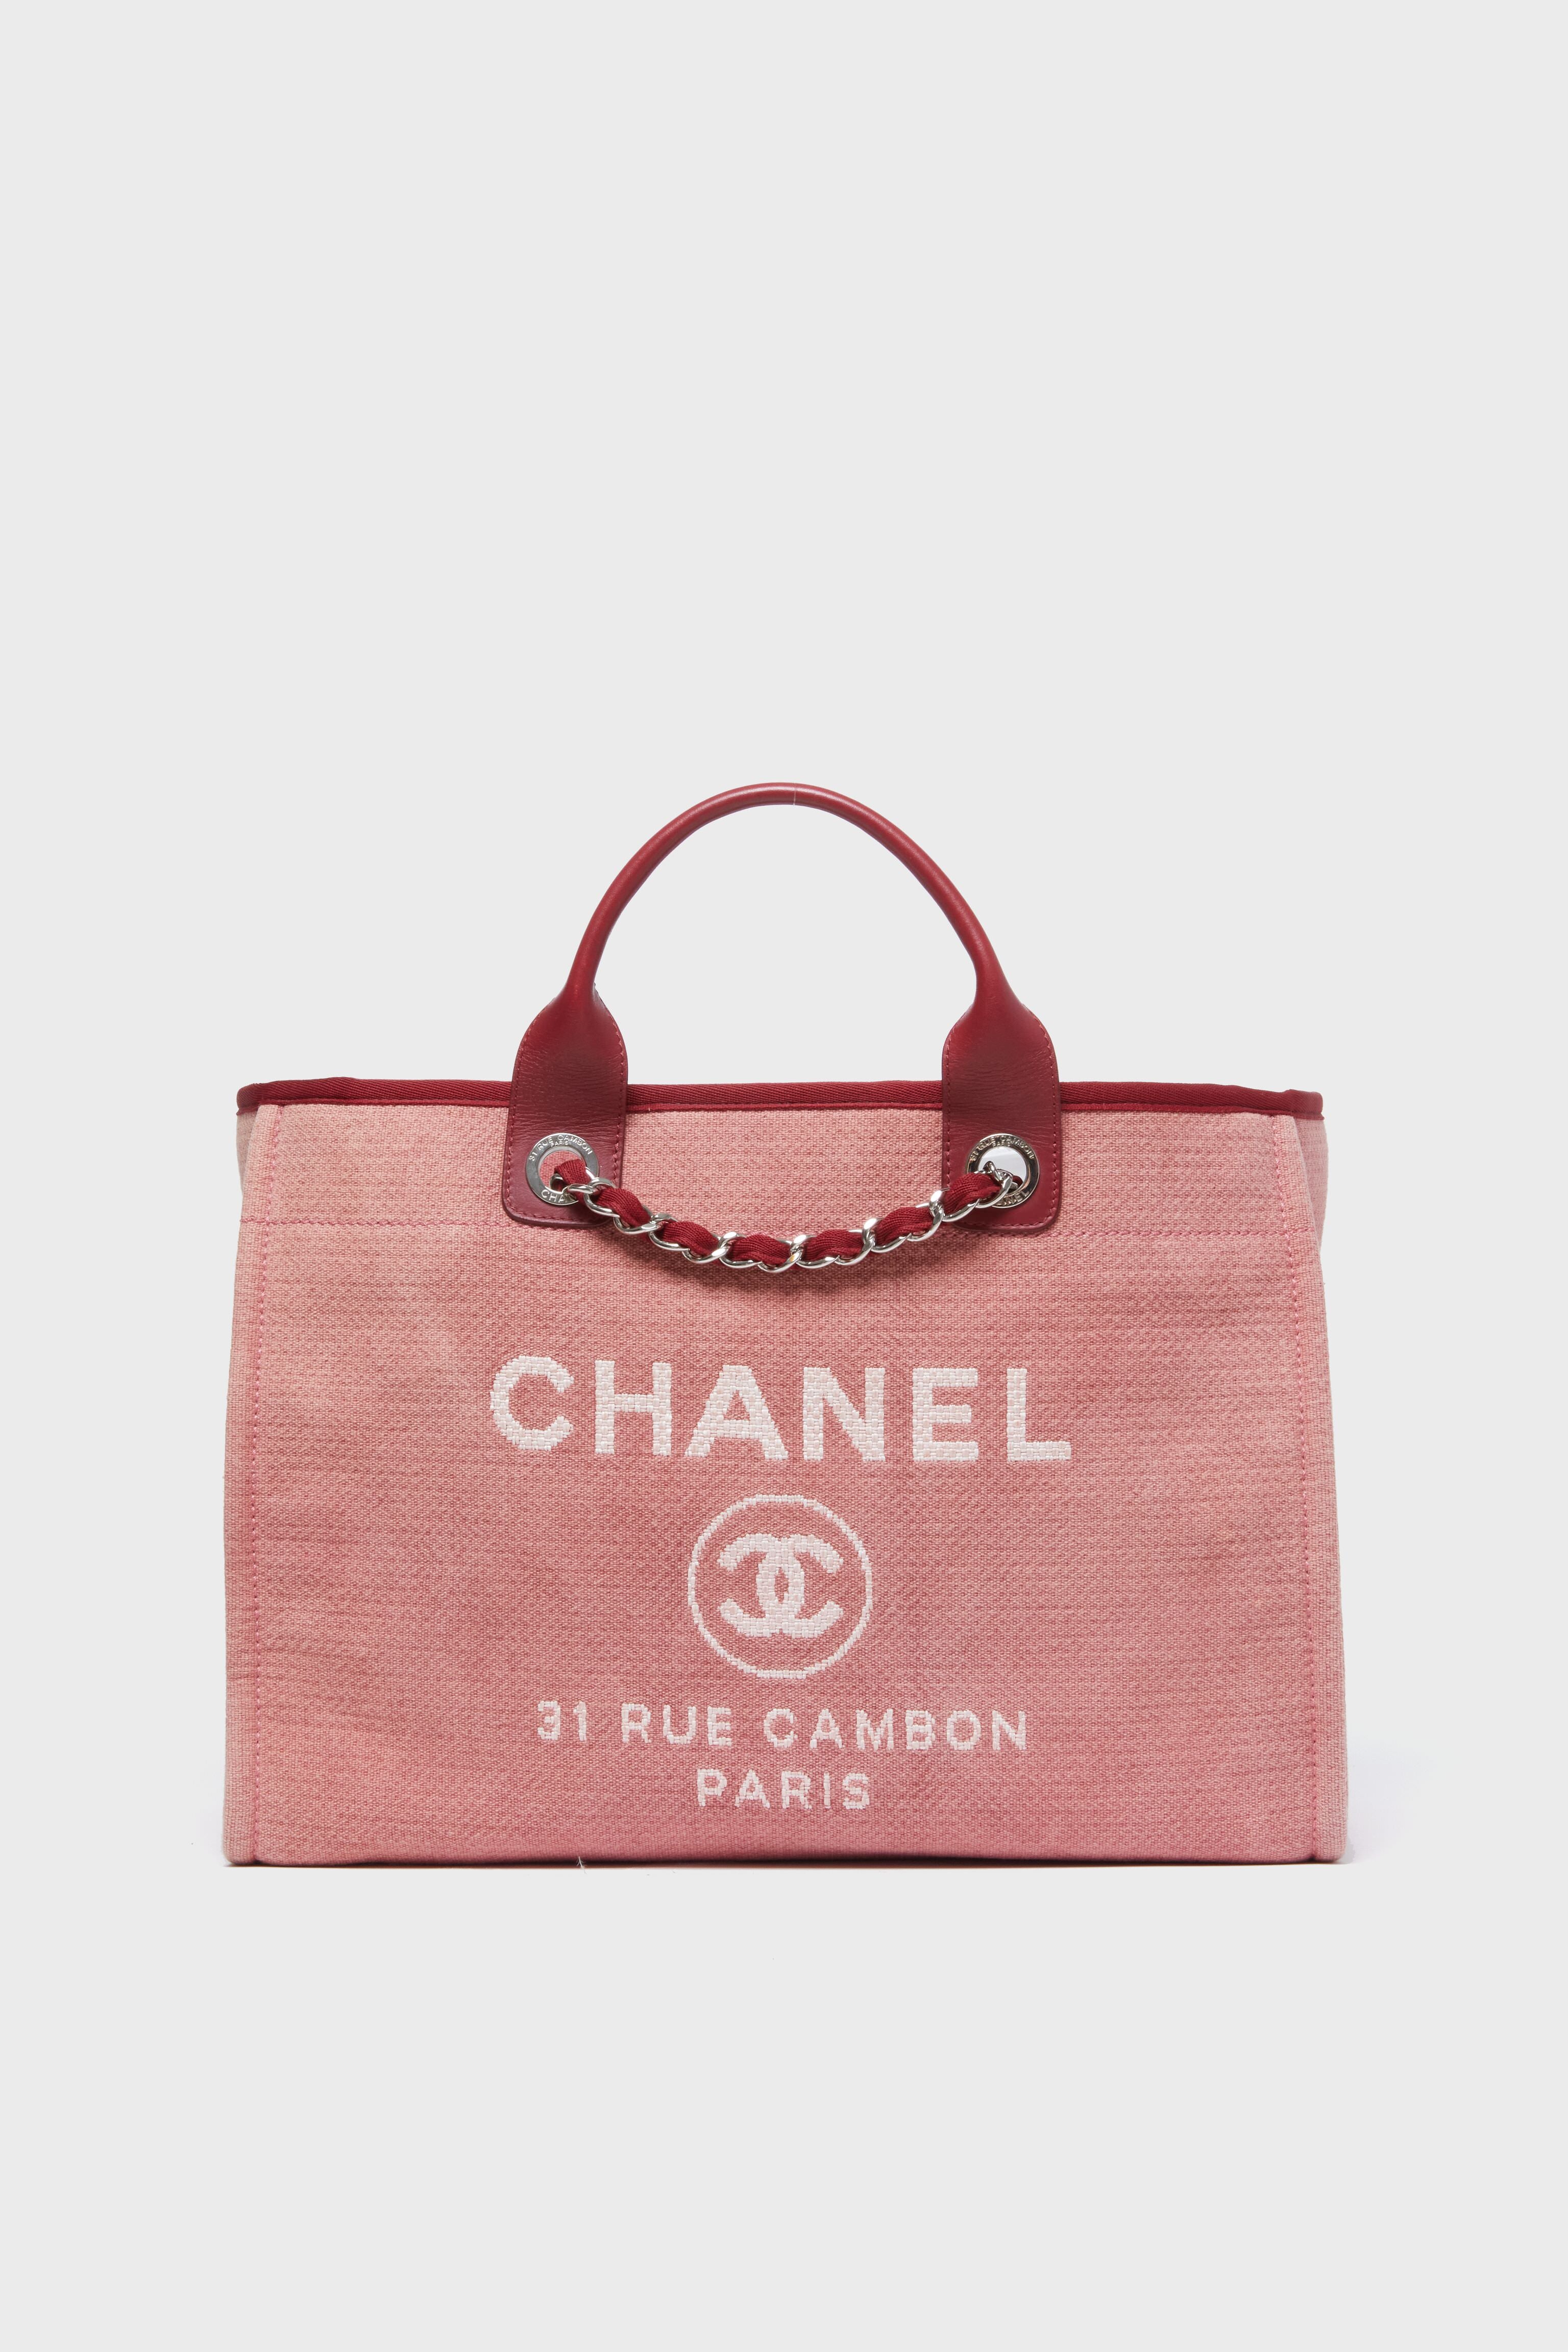 Chanel Deauville Large Red Pink 2012 Tote Bag